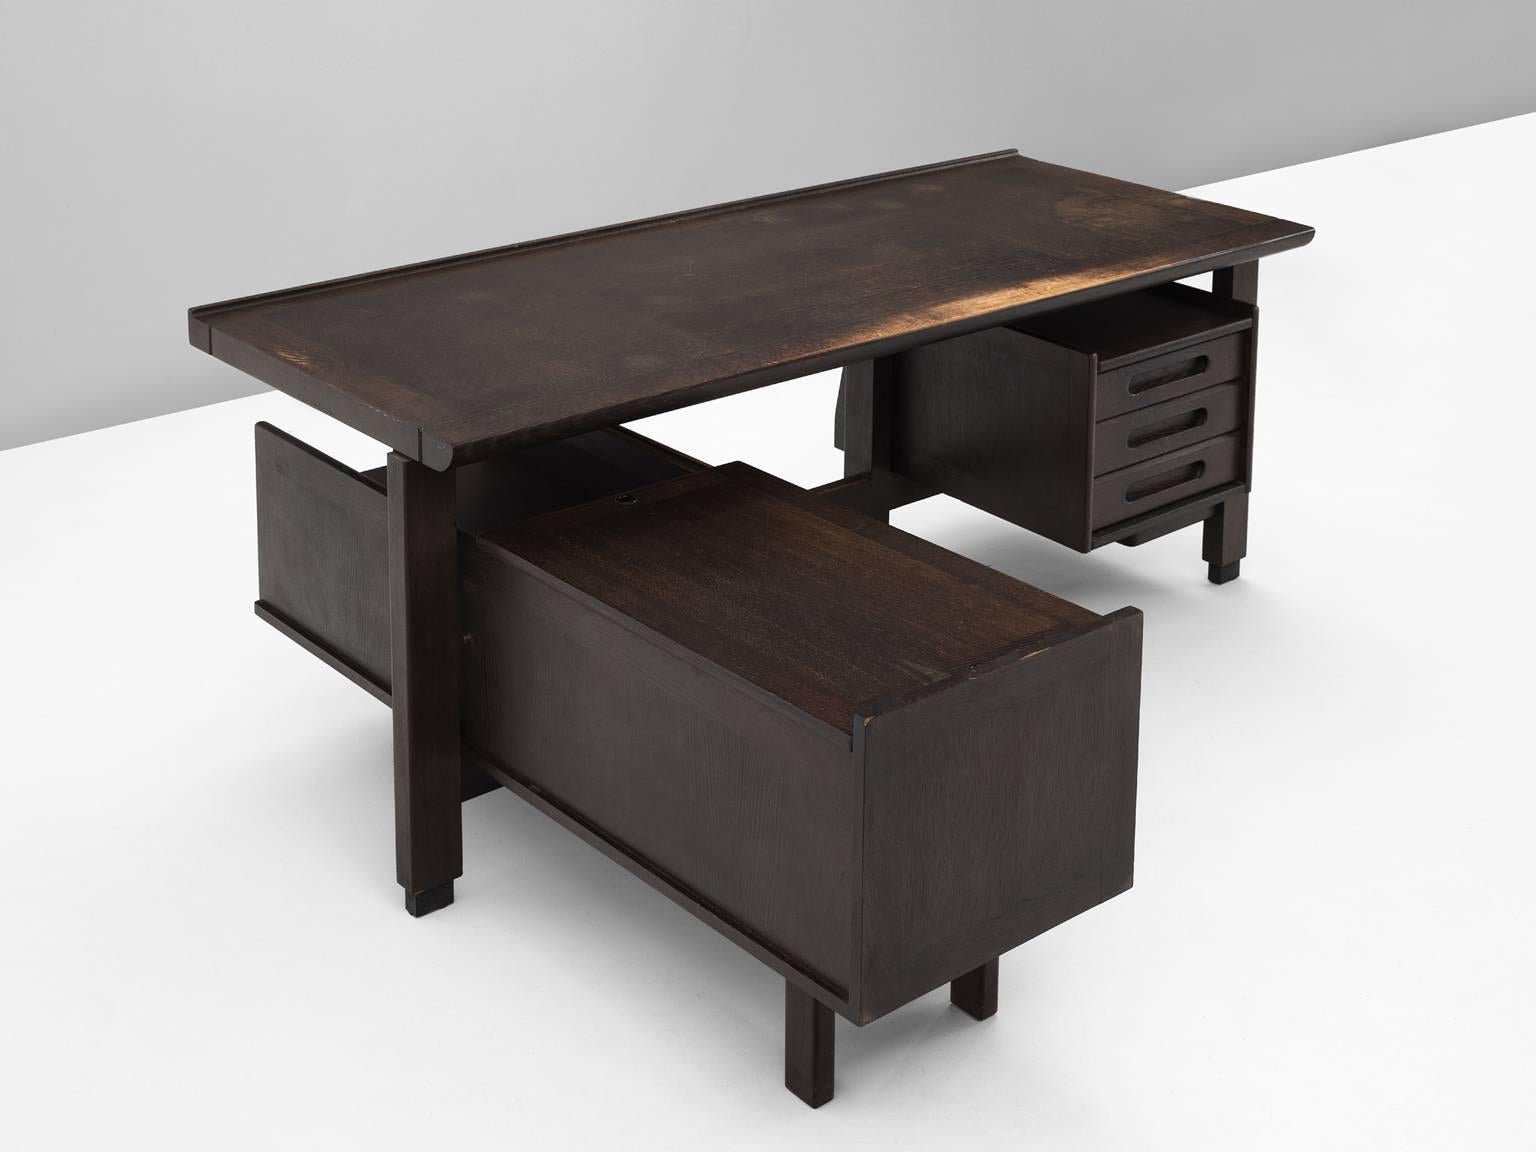 Corner desk in stained oak, by Guillerme et Chambron, France, 1960s. 

Corner desk by French designer duo Guillerme and Chambron. This executive desk shows the fine craftsmanship and line work that characterizes the work of this designer duo. The